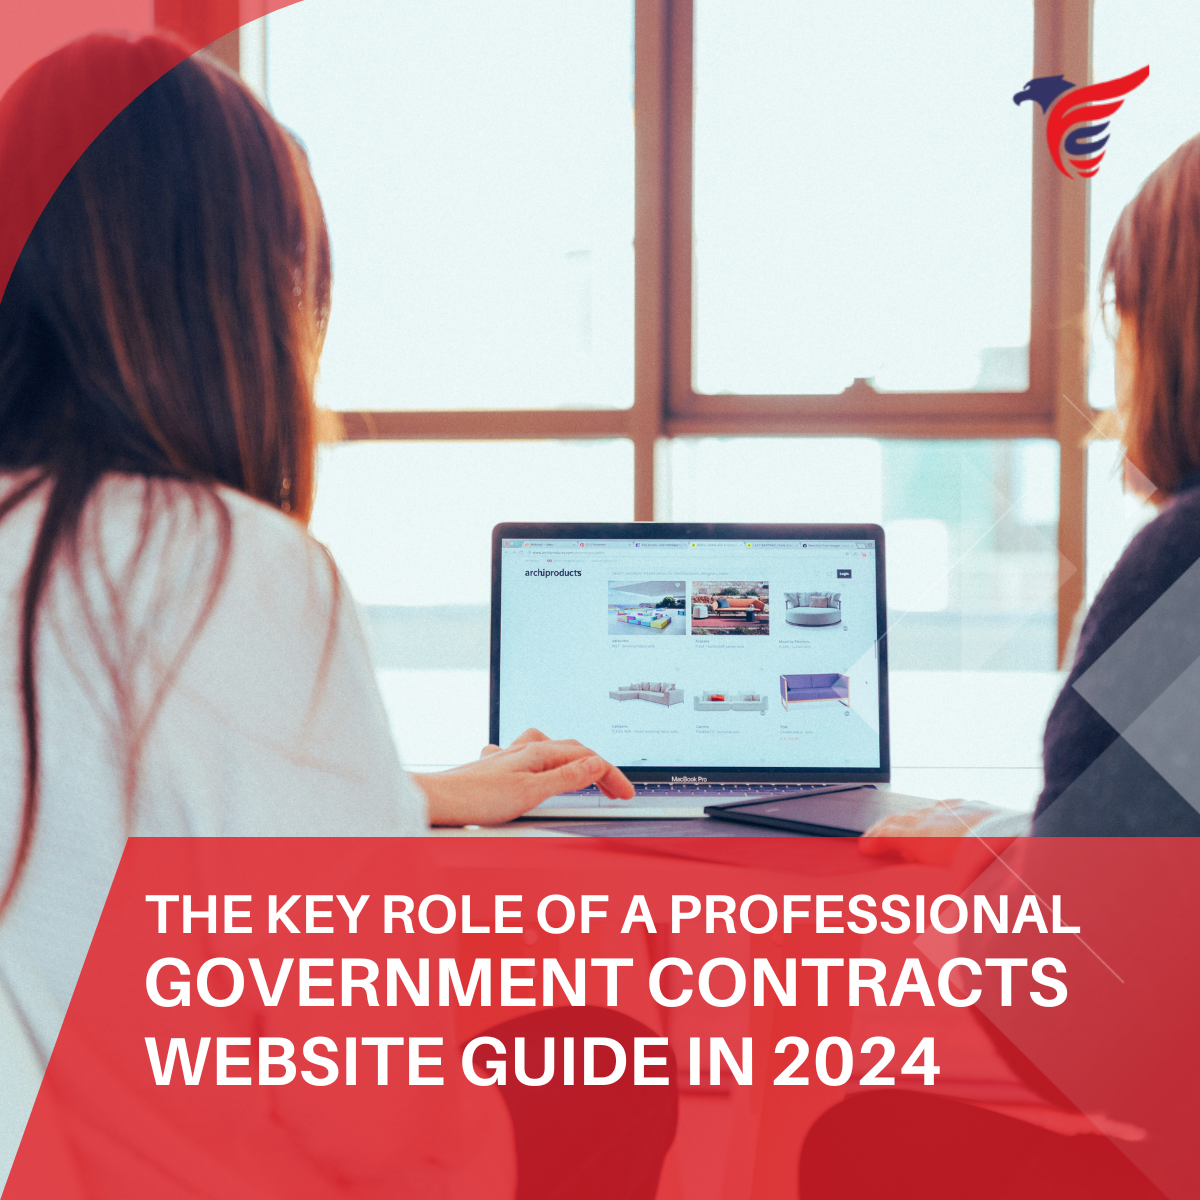 Professional Government Contracts Website Guide in 2024